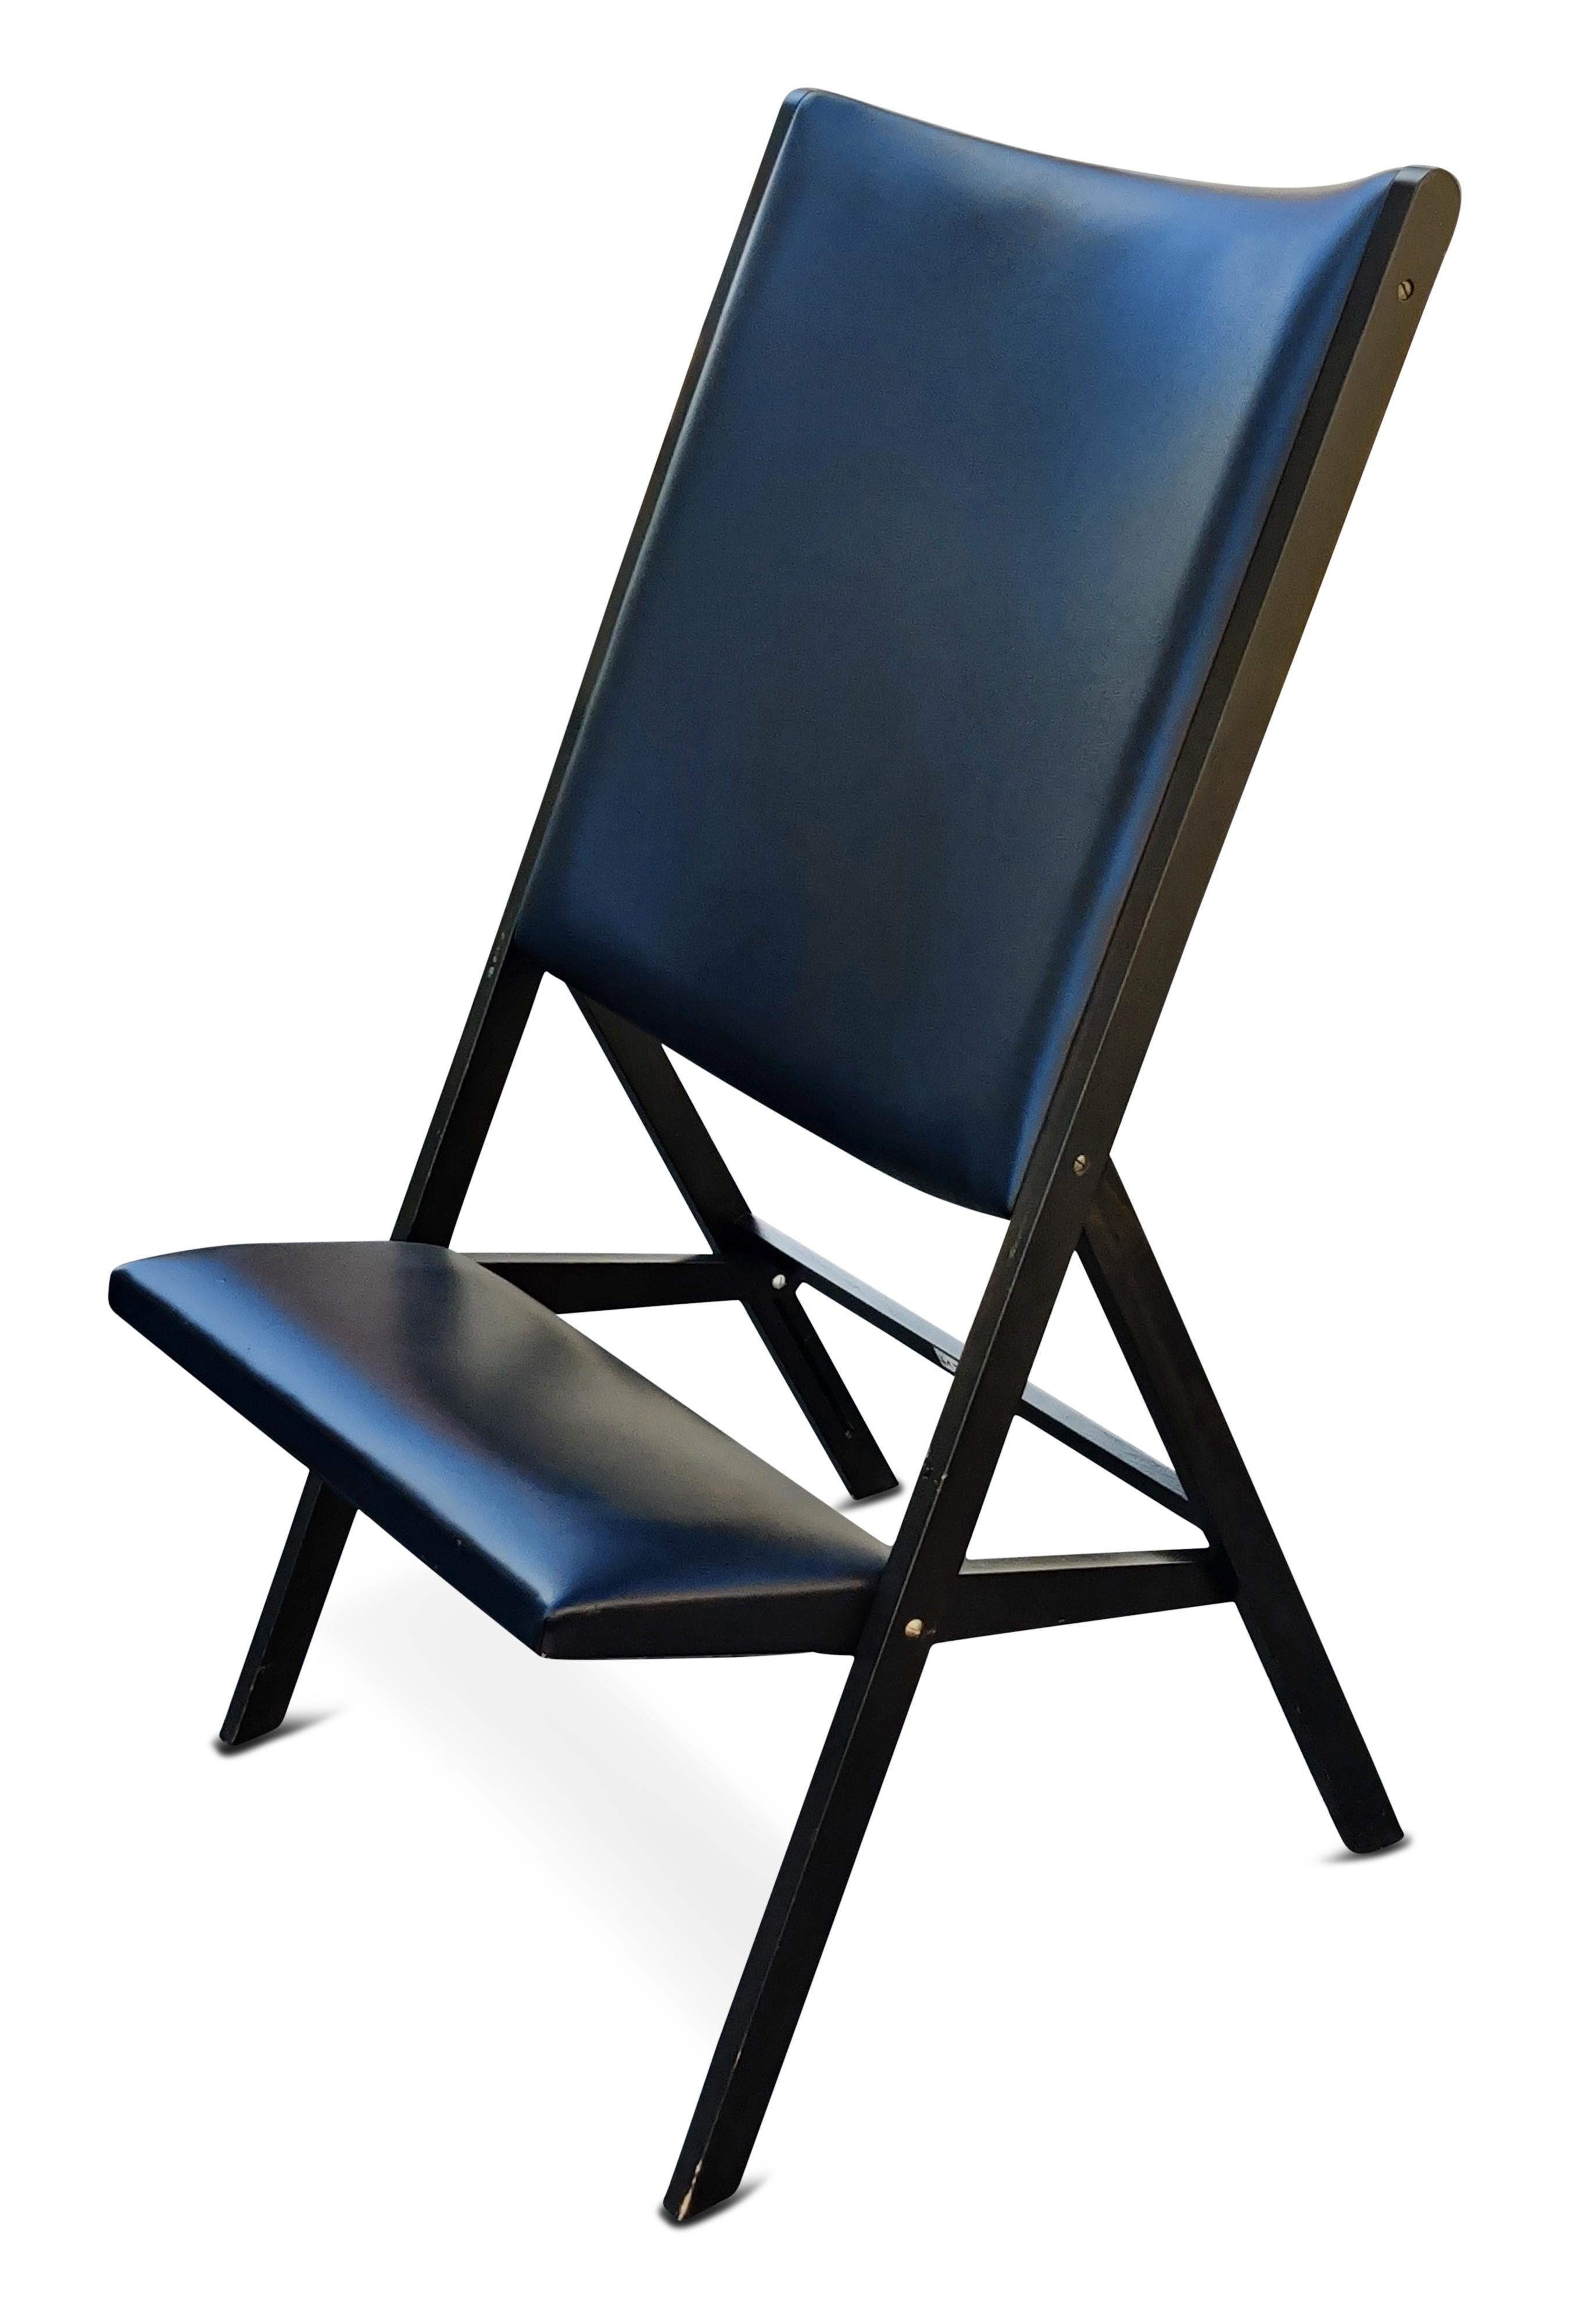 Mid-Century Modern Pair of Gio Ponti for Walter Ponti Gabriella Folding Chairs Model D.270.2 Black For Sale